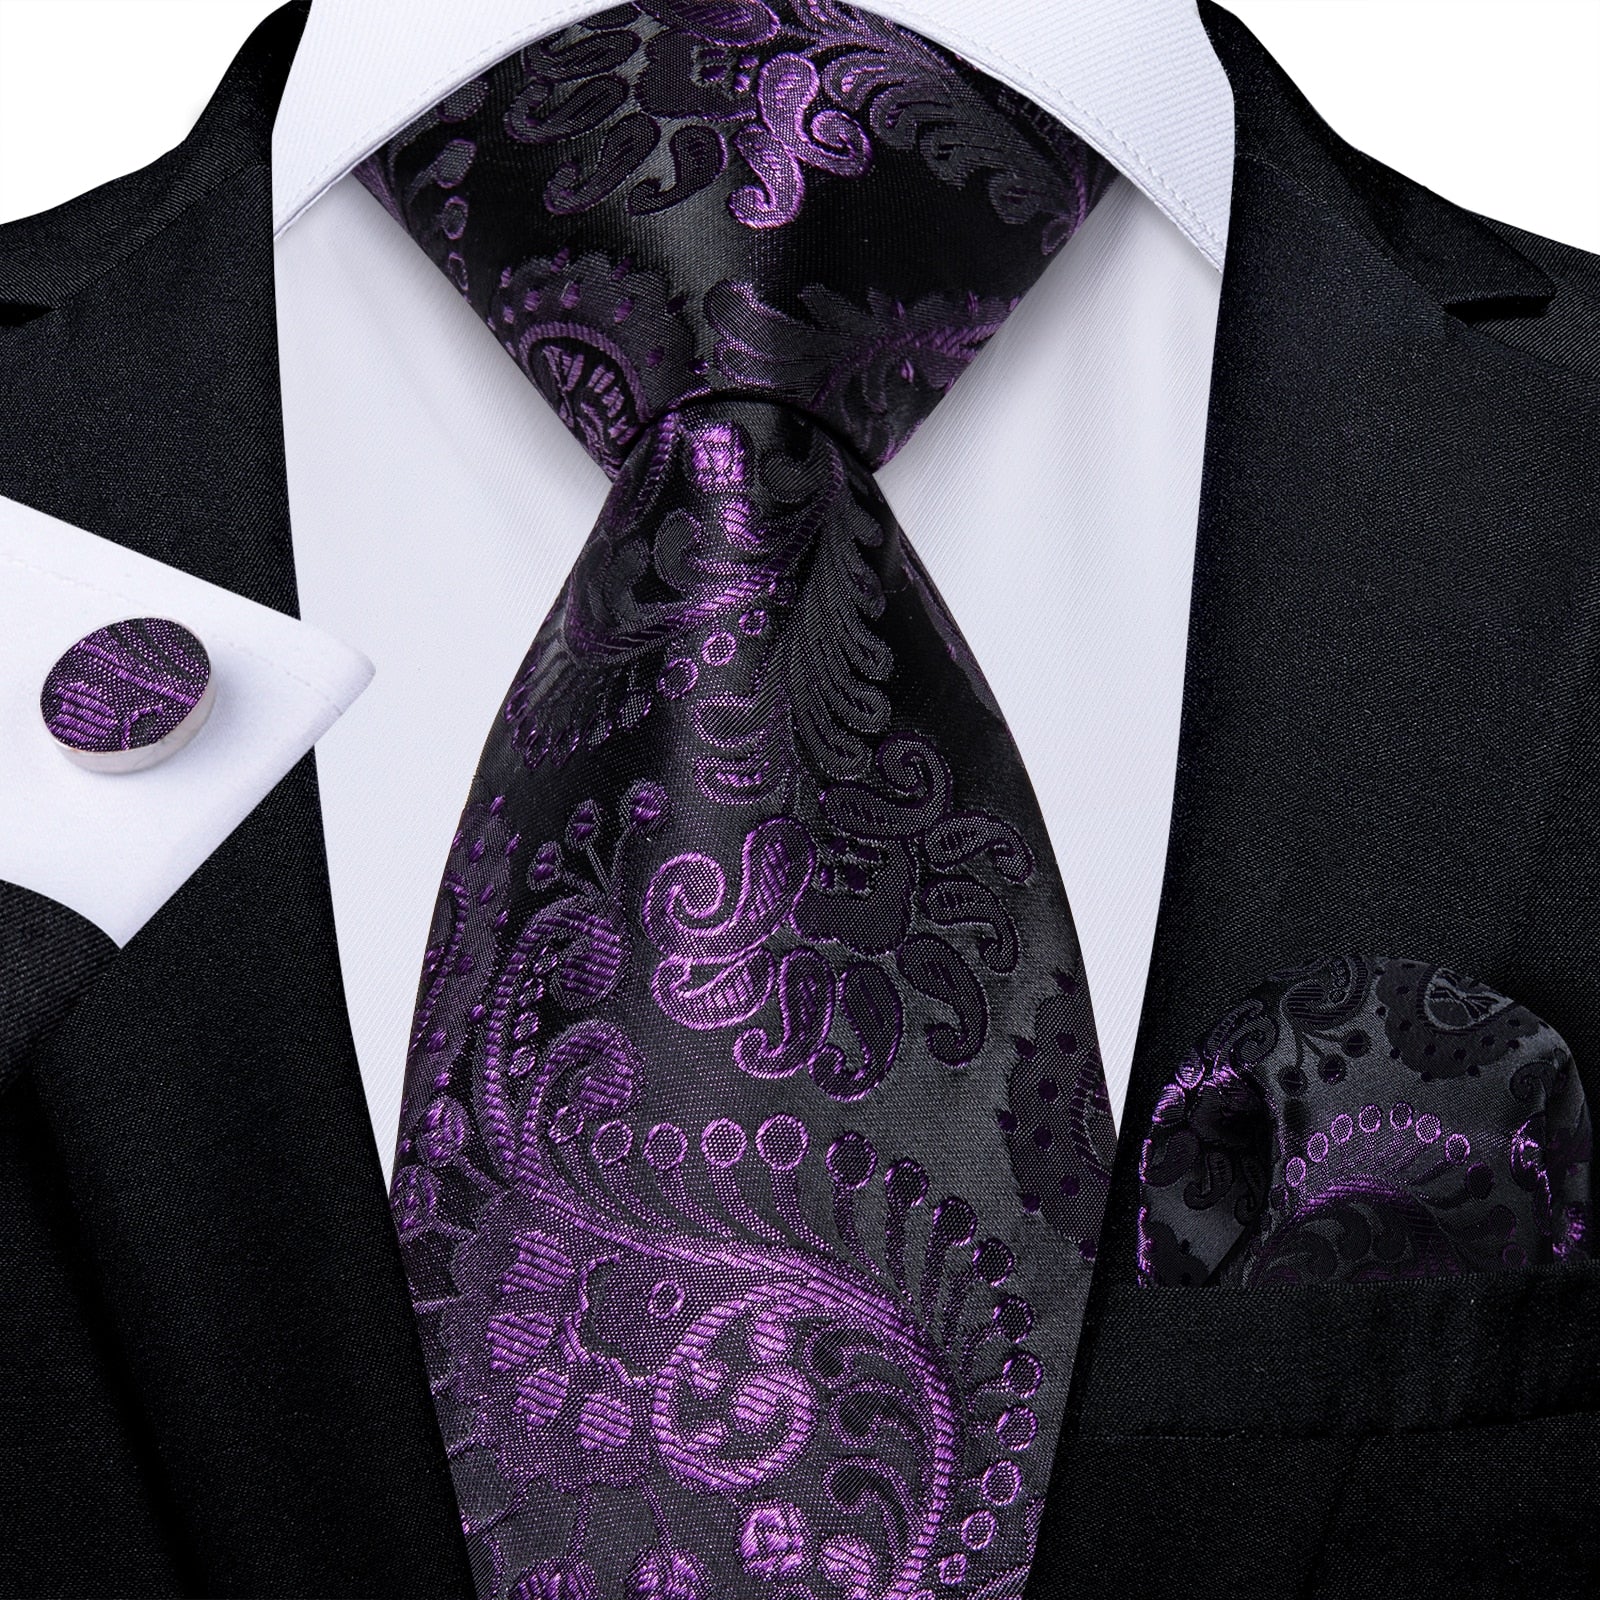 Men Purple Floral Paisley Necktie Business Formal 100% Silk Tie Pocket Square Set For Wedding Party The Clothing Company Sydney